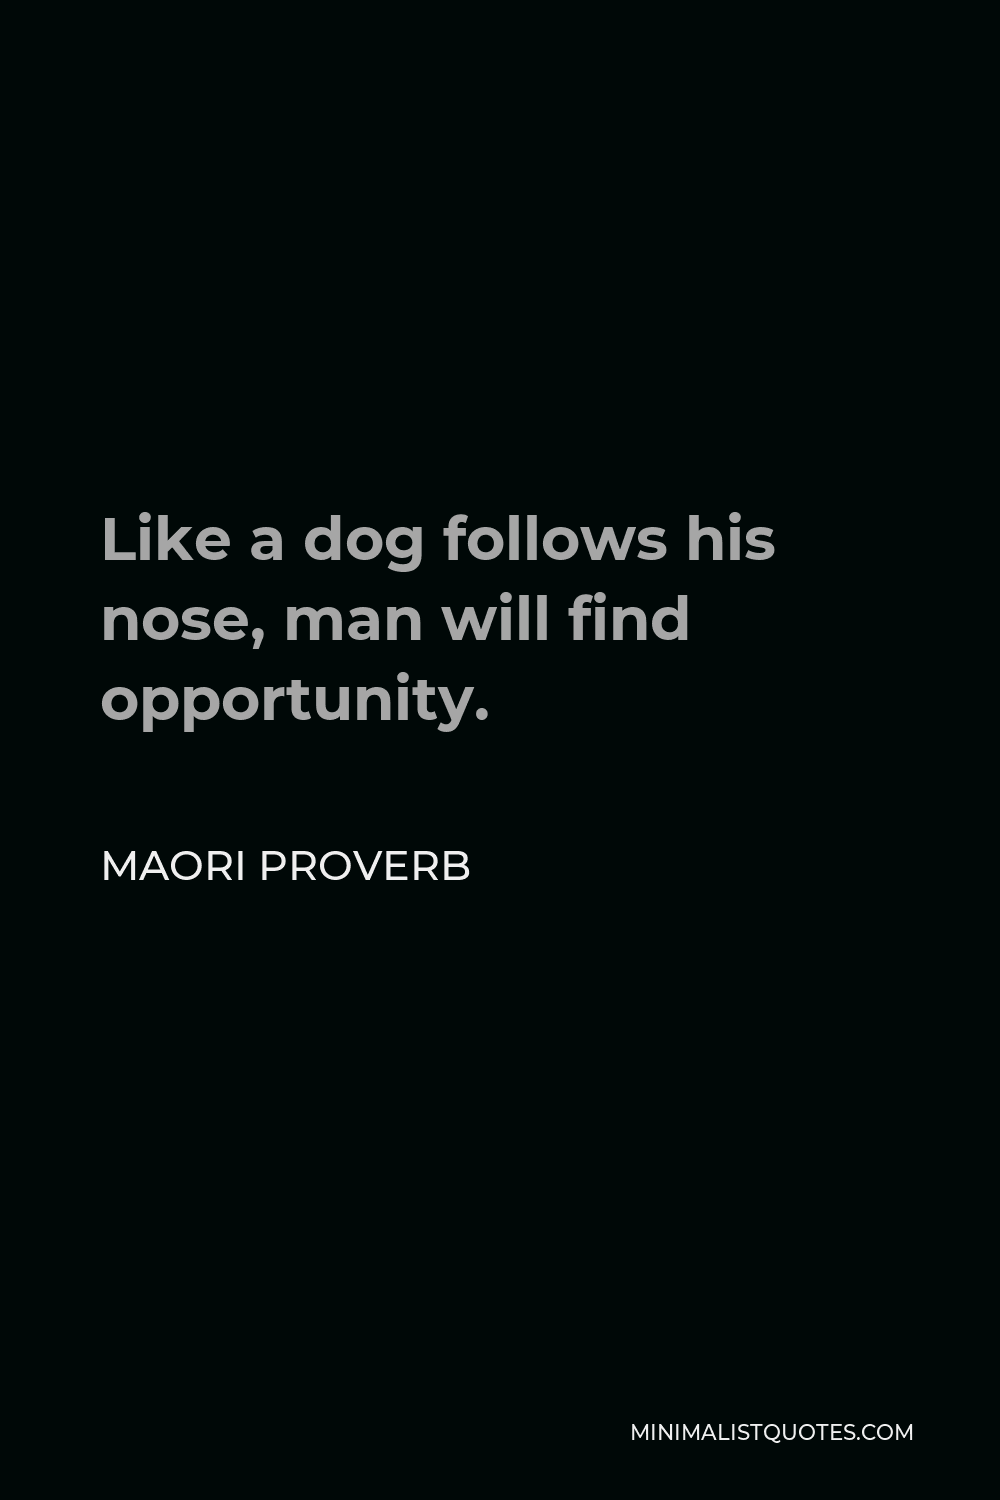 Maori Proverb Quote - Like a dog follows his nose, man will find opportunity.